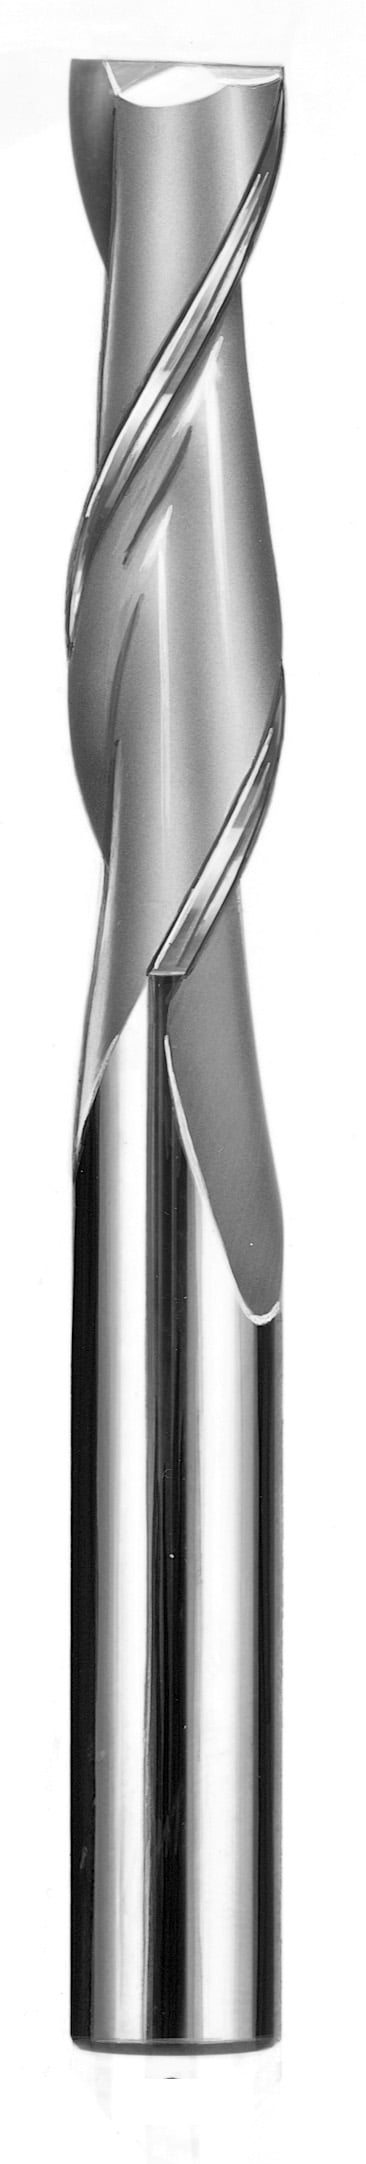 1" Dia, 2 Flute, Square End End Mill - 33317